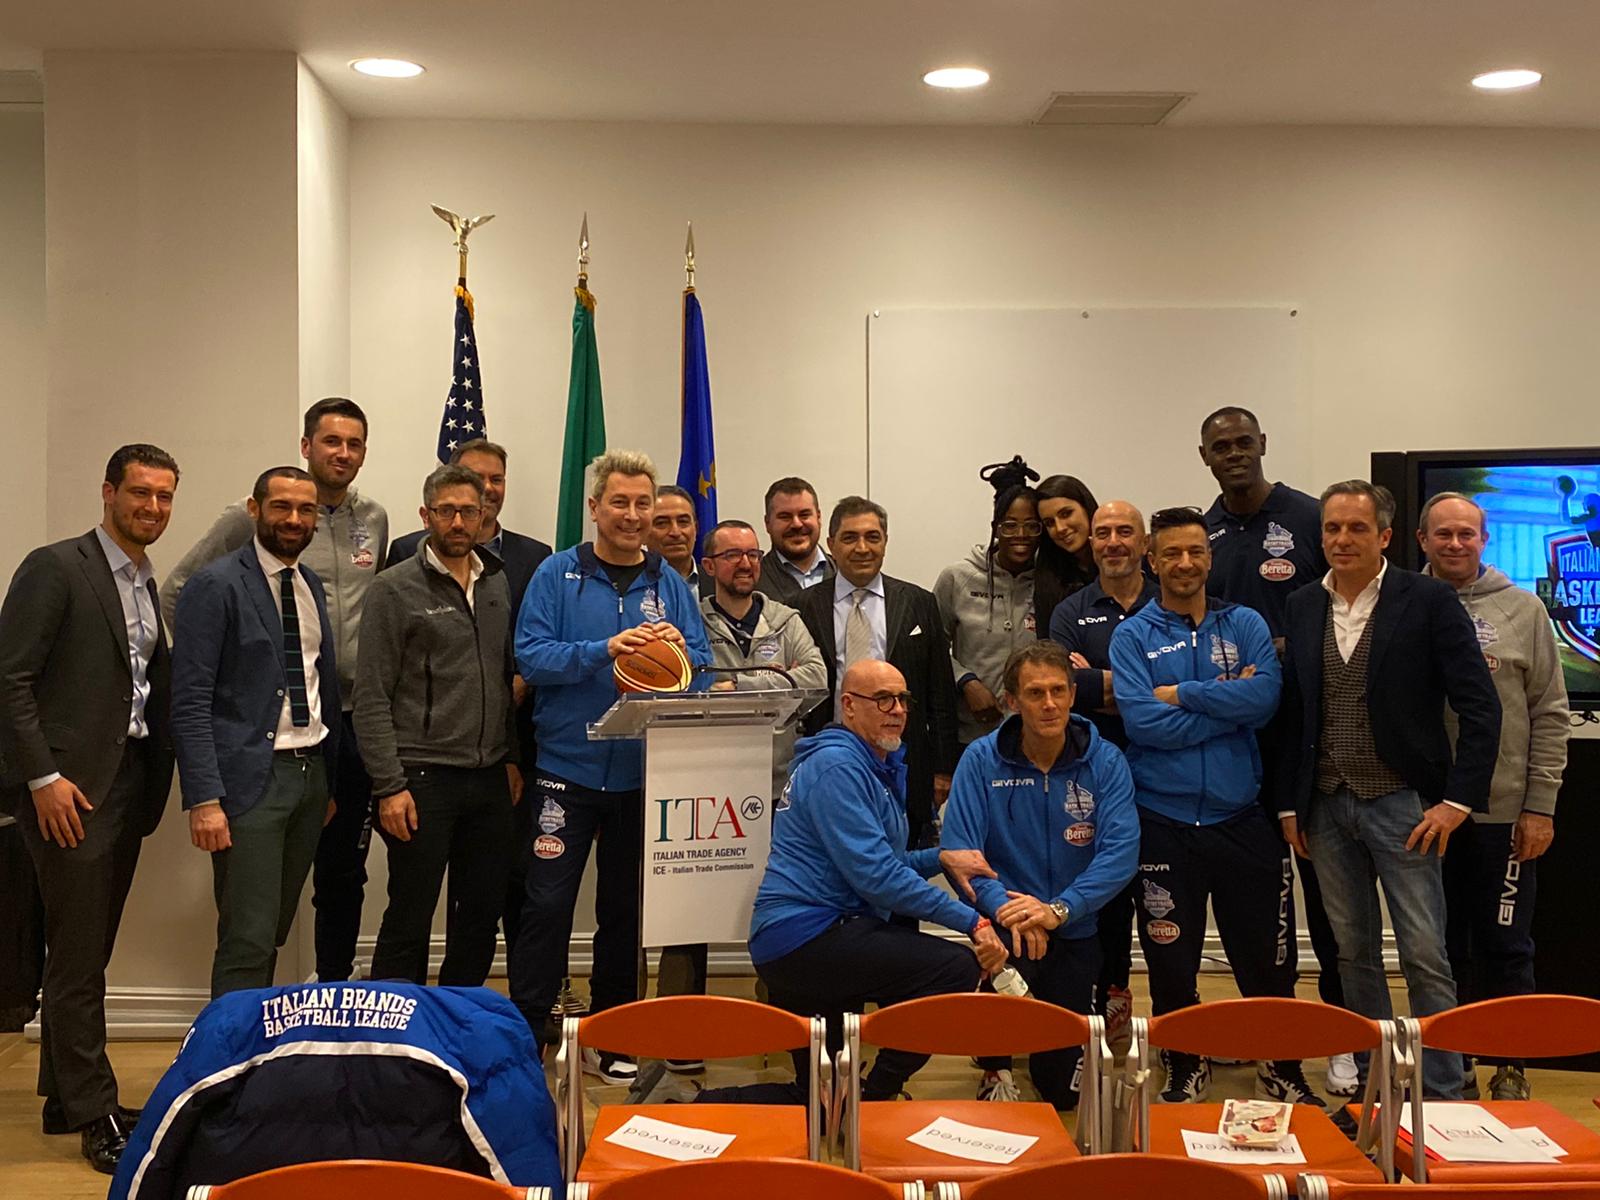 Made in Italy takes the field in New York with IBBL